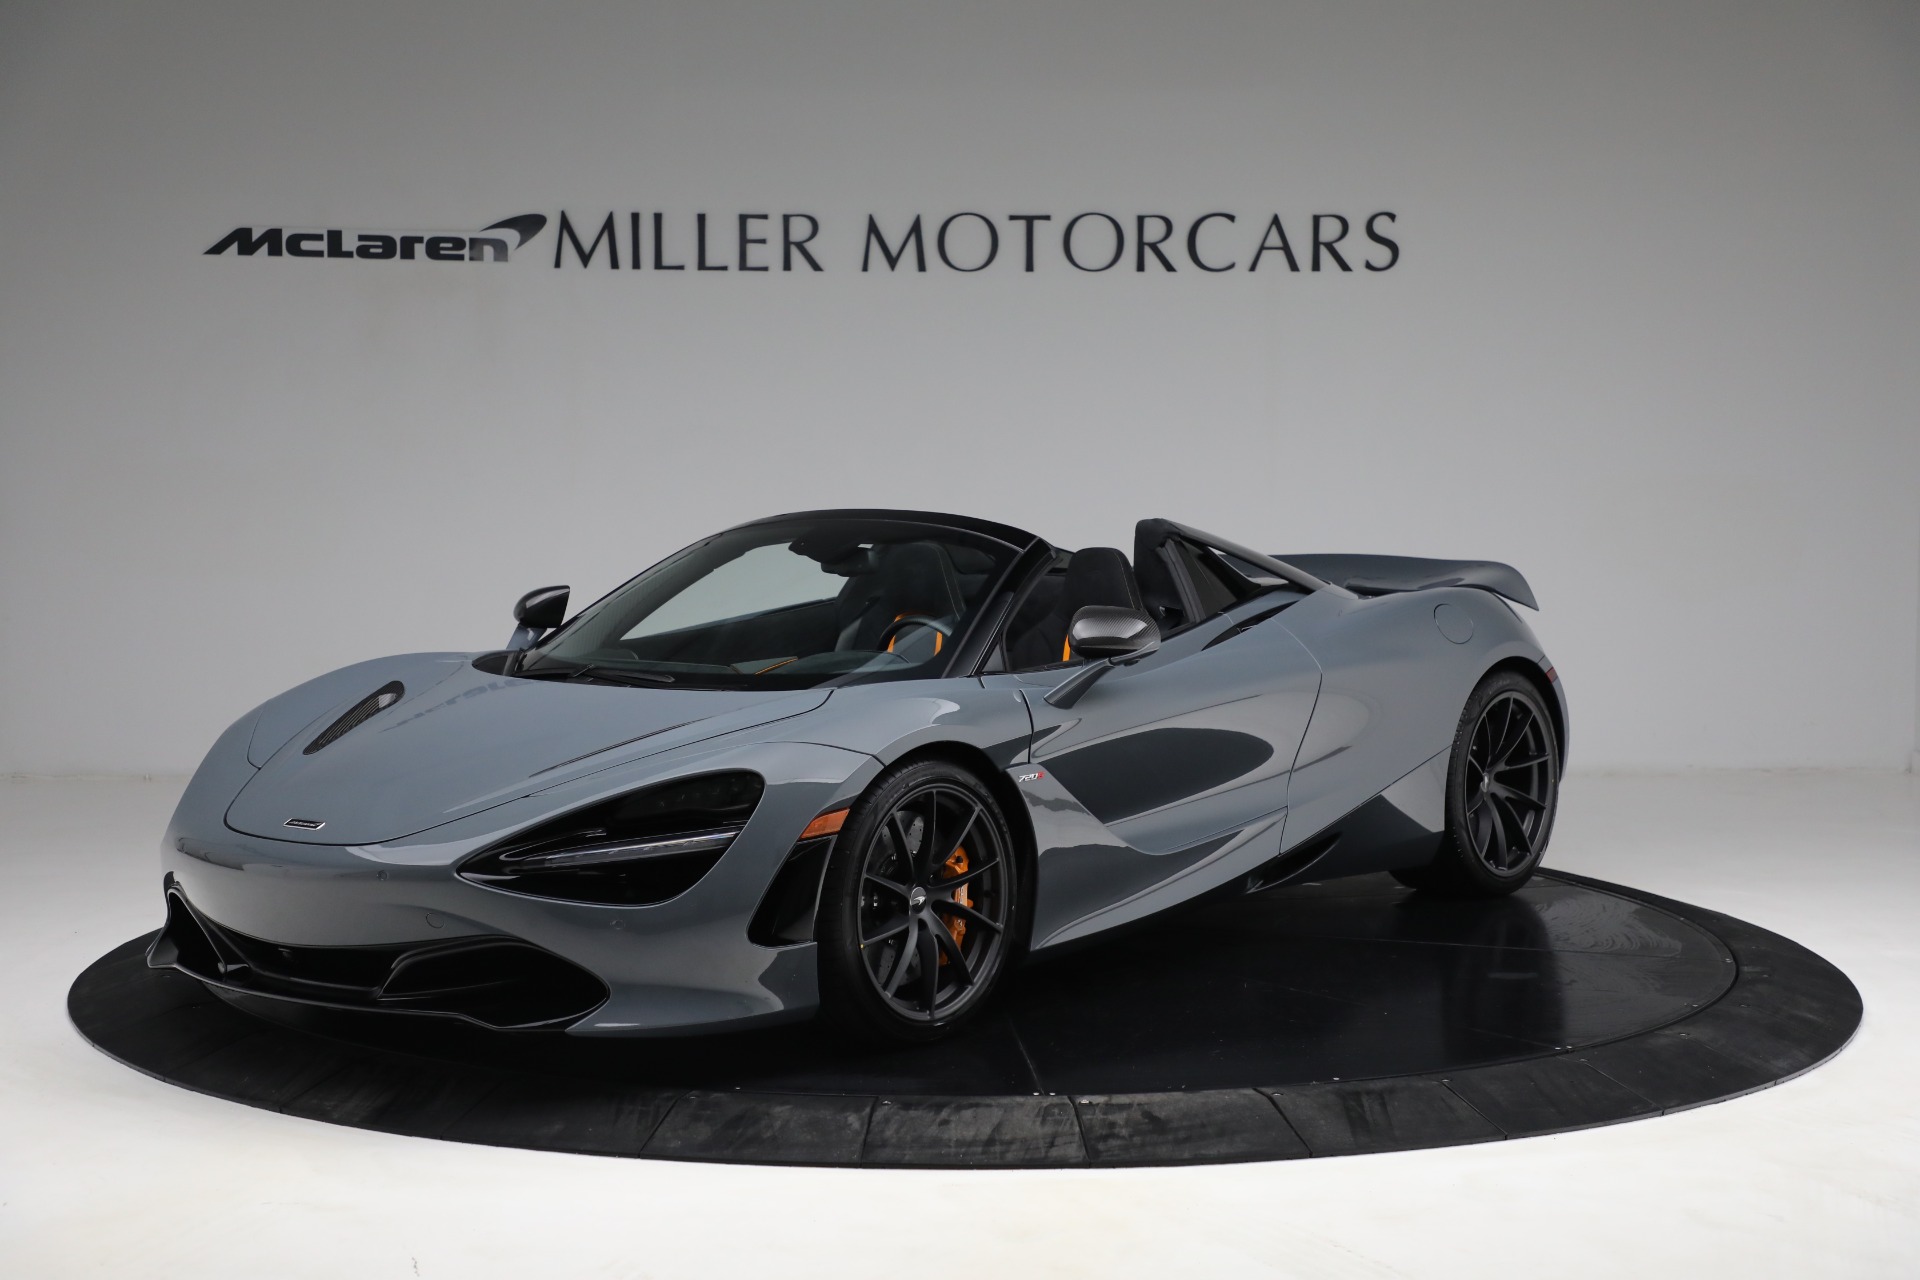 New 2021 McLaren 720S Spider for sale Sold at Bugatti of Greenwich in Greenwich CT 06830 1